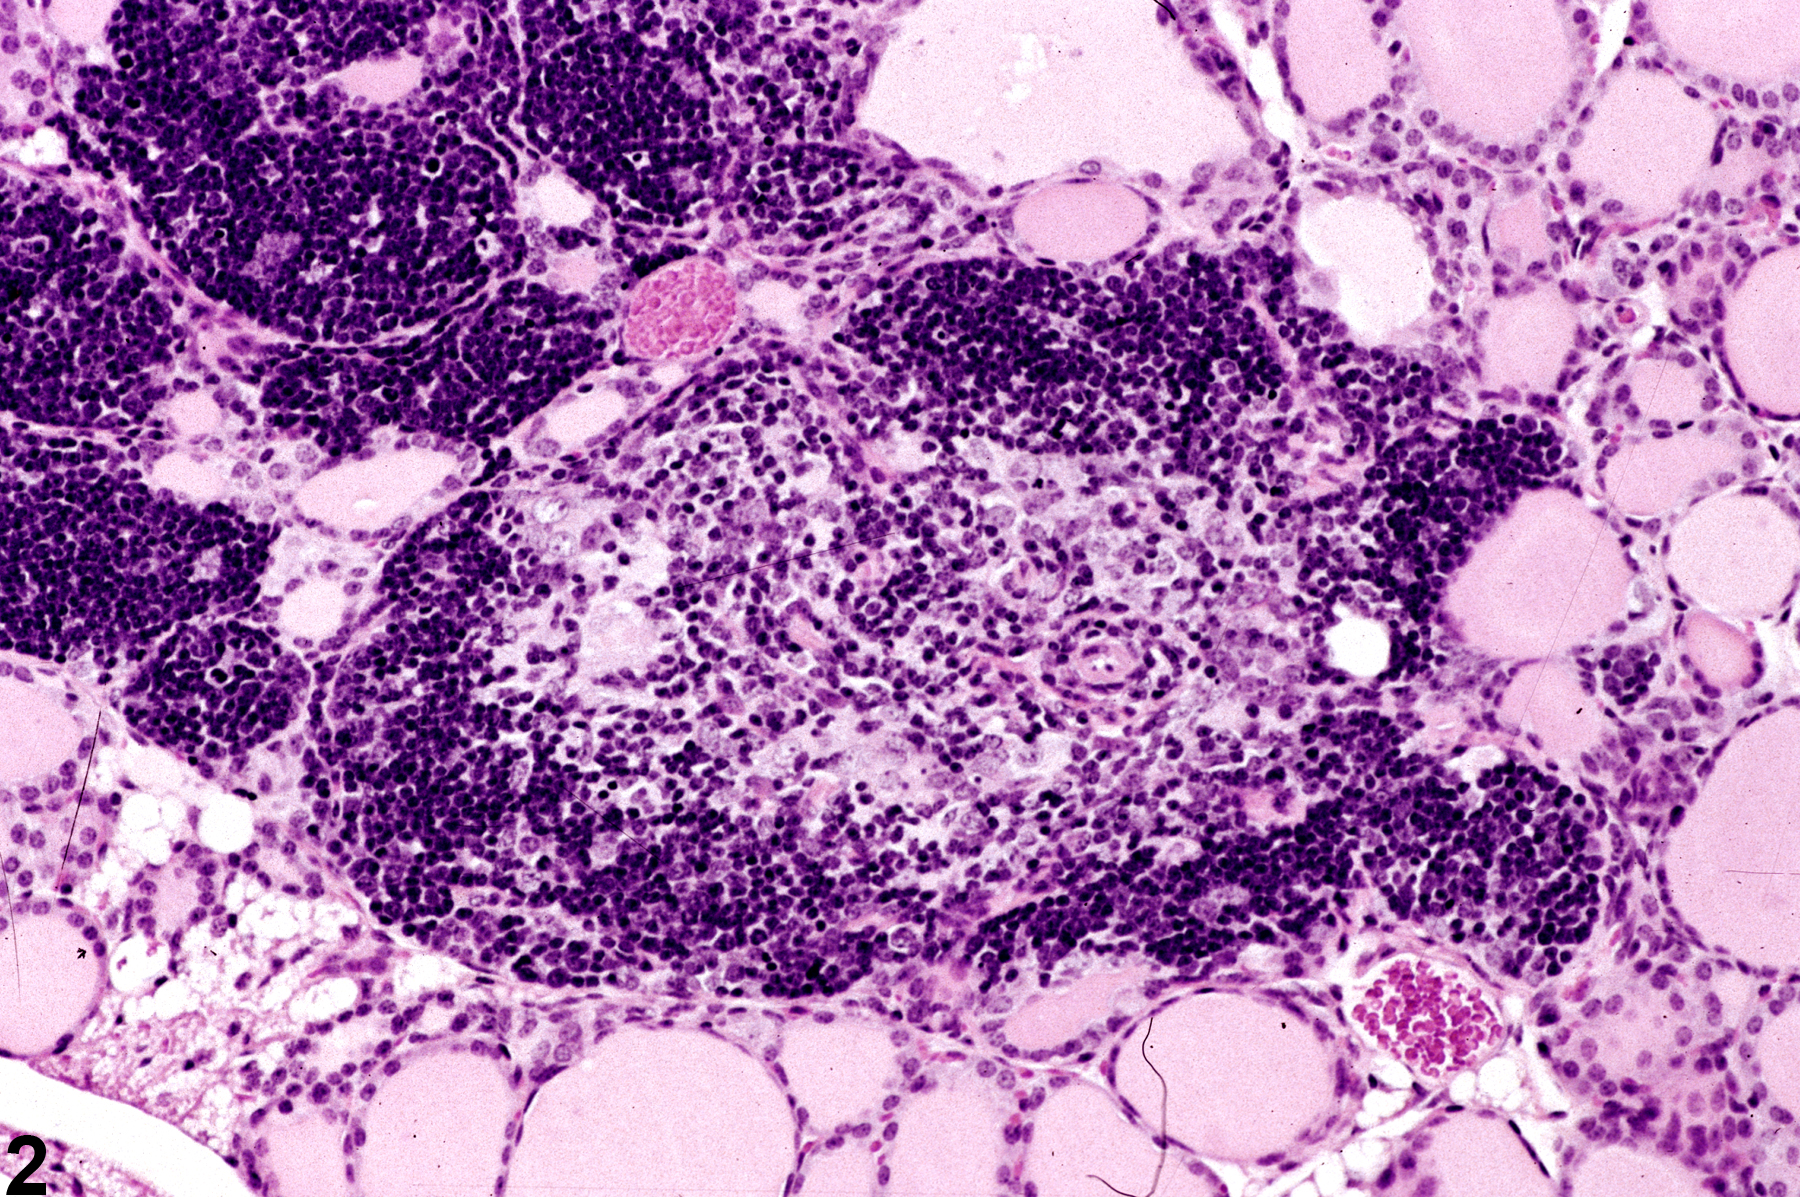 Image of ectopic tissue in the thyroid gland from a female B6C3F1 mouse in a subchronic study